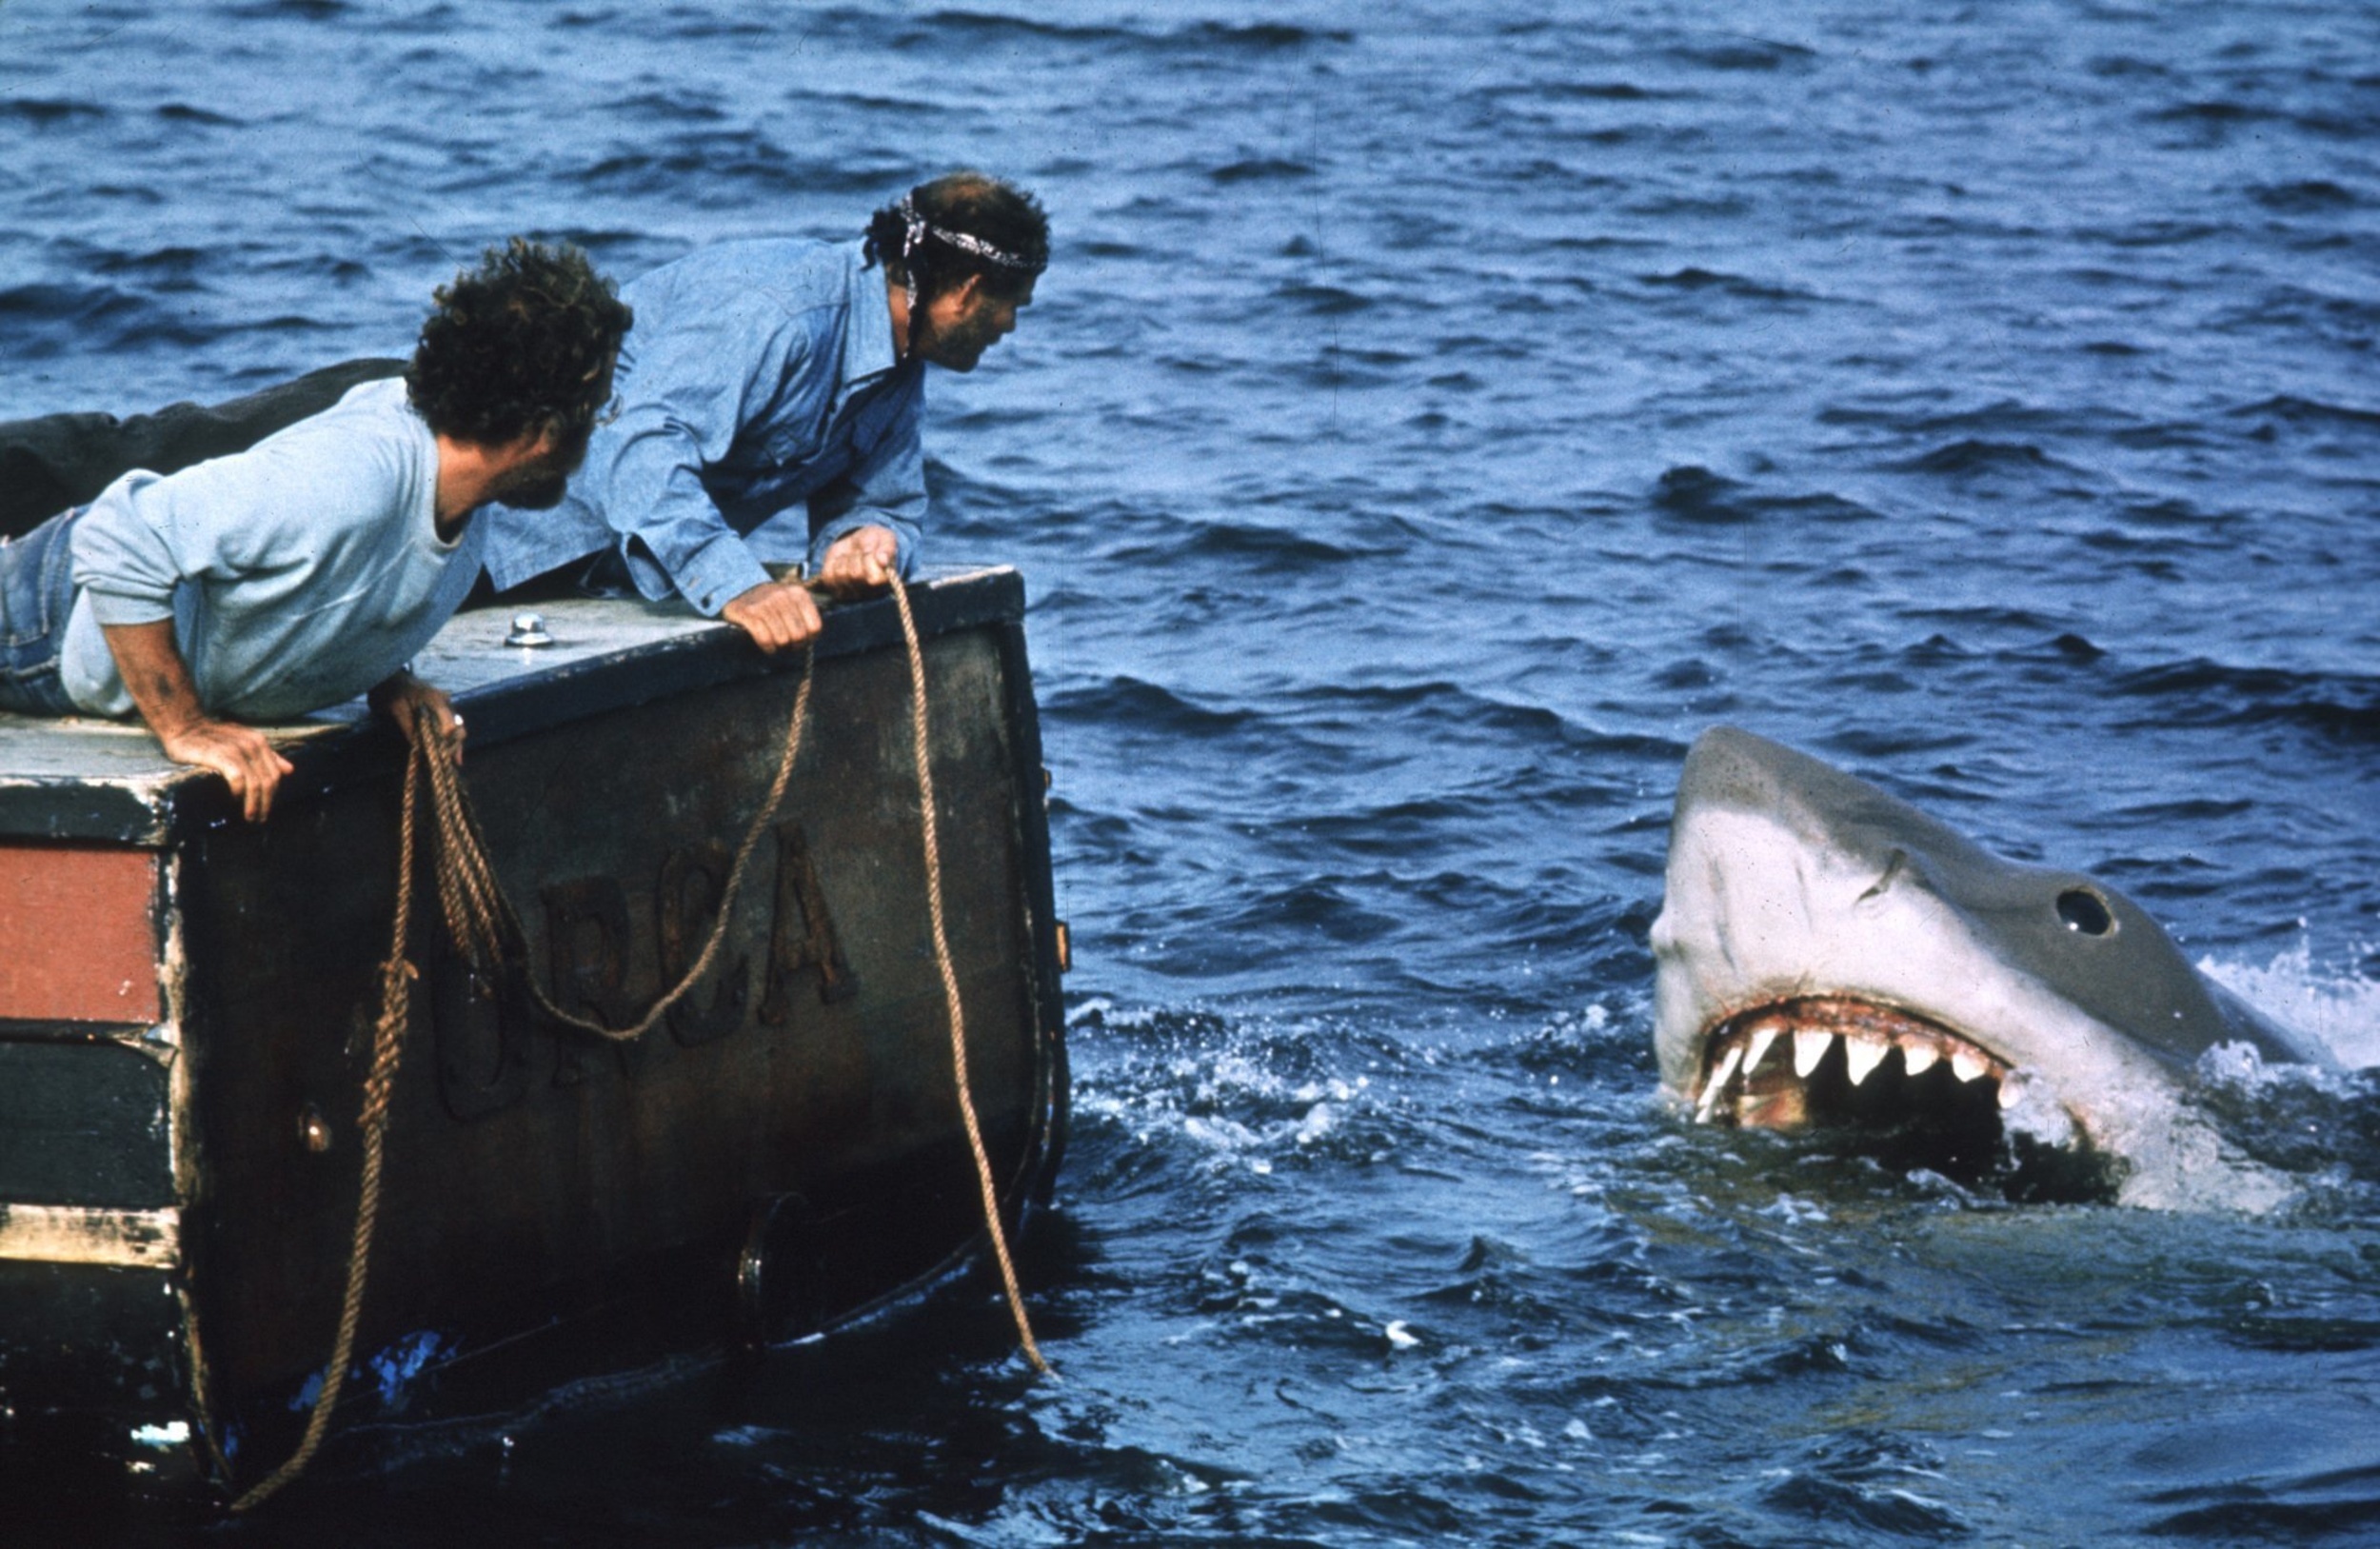 <p>Yes, it's the shark movie. Yes, it's the movie that scared millions from going in the ocean. Yes, it's the movie where a small town gets eaten alive by a giant monster. And yes, it's still entertaining. Steven Spielberg's classic still has bite.</p><p><a href='https://www.msn.com/en-us/community/channel/vid-cj9pqbr0vn9in2b6ddcd8sfgpfq6x6utp44fssrv6mc2gtybw0us'>Follow us on MSN to see more of our exclusive entertainment content.</a></p>